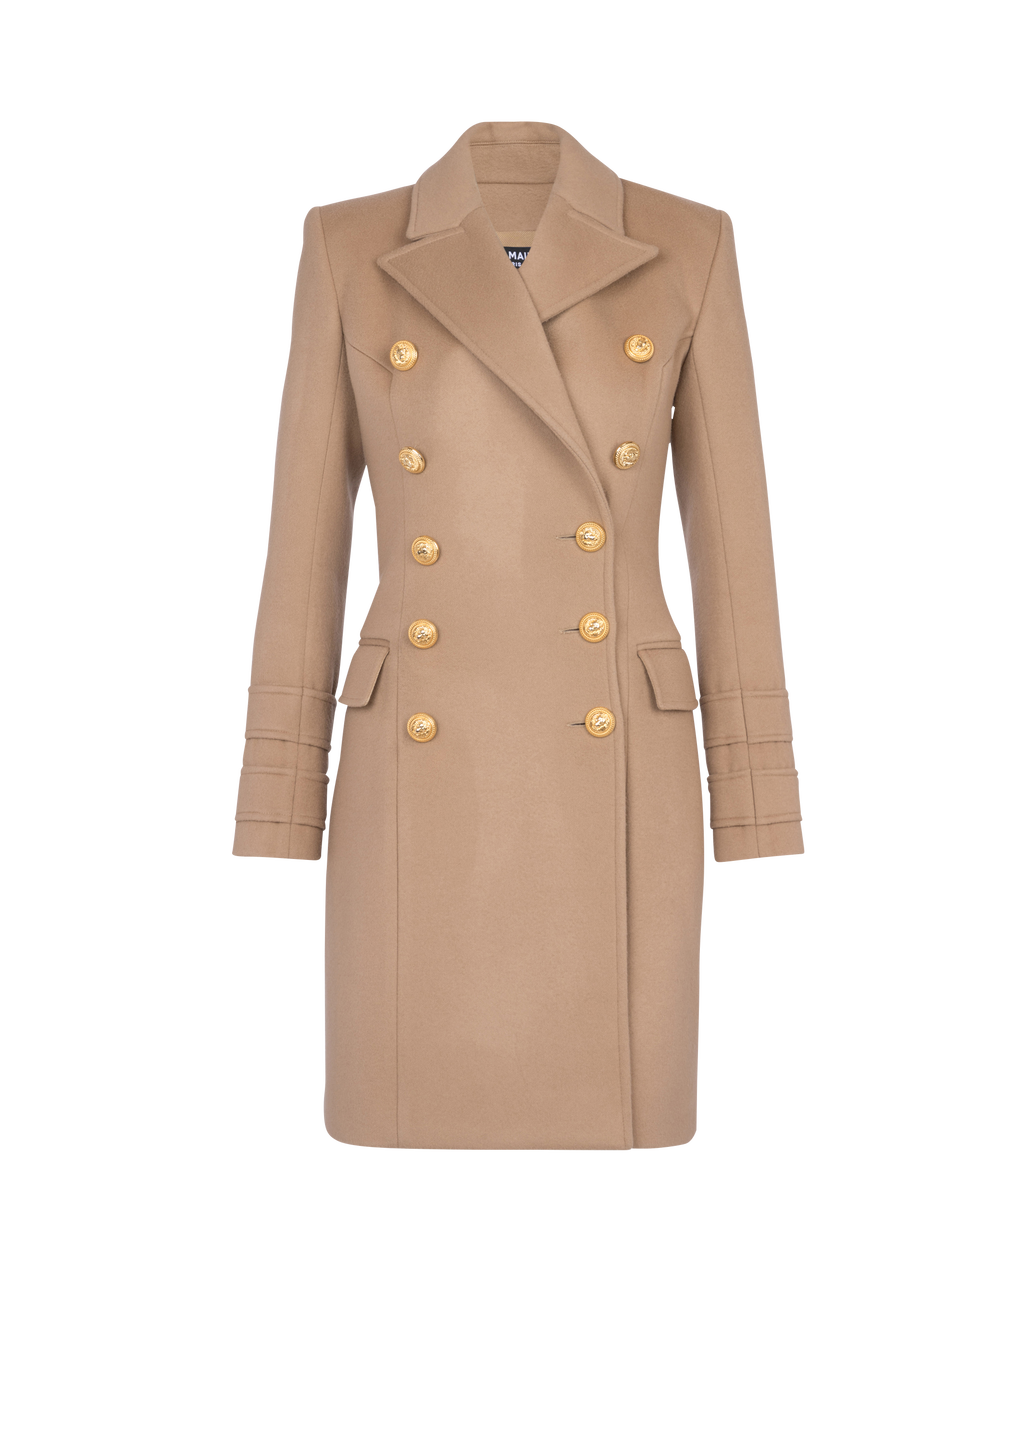 Long wool double-breasted coat, brown, hi-res